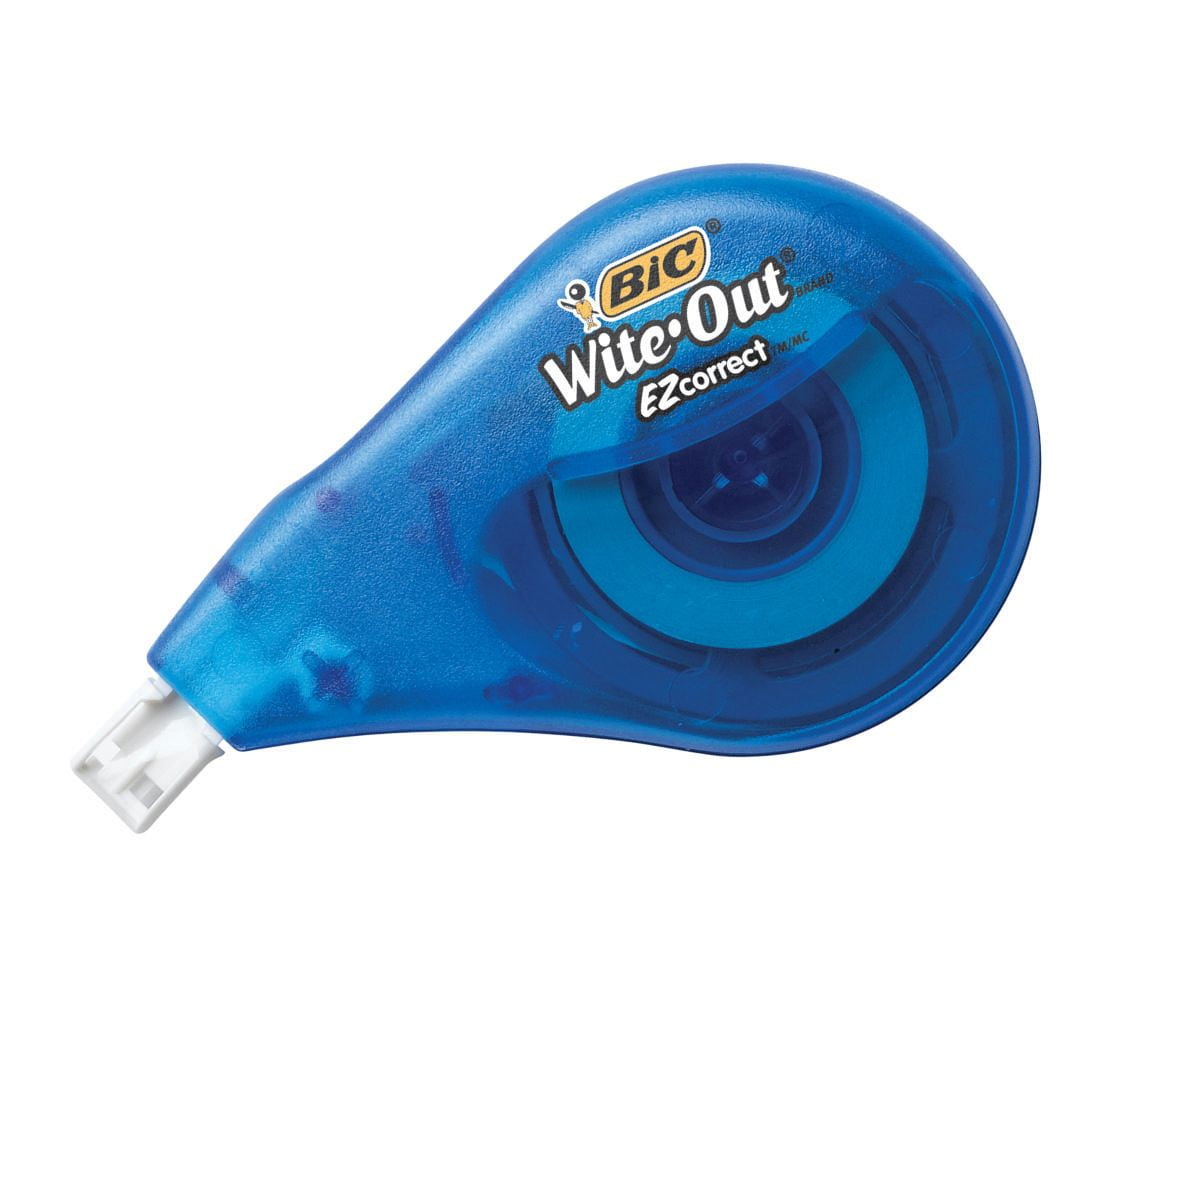 BIC Wite Out Brand EZ Correct Correction Tape Review - How